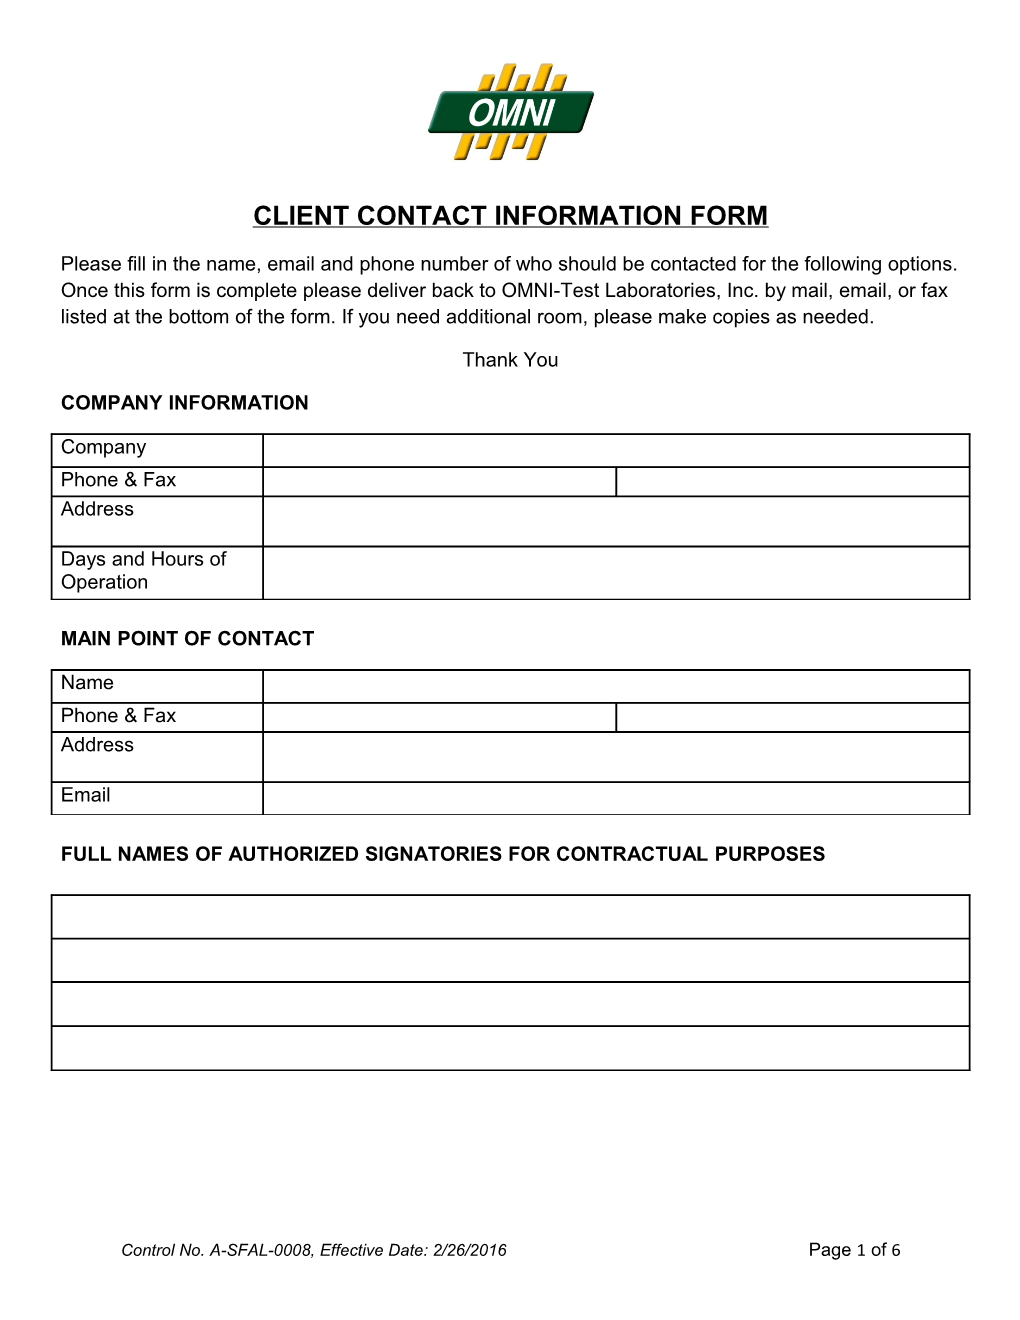 Client Contact Information Form